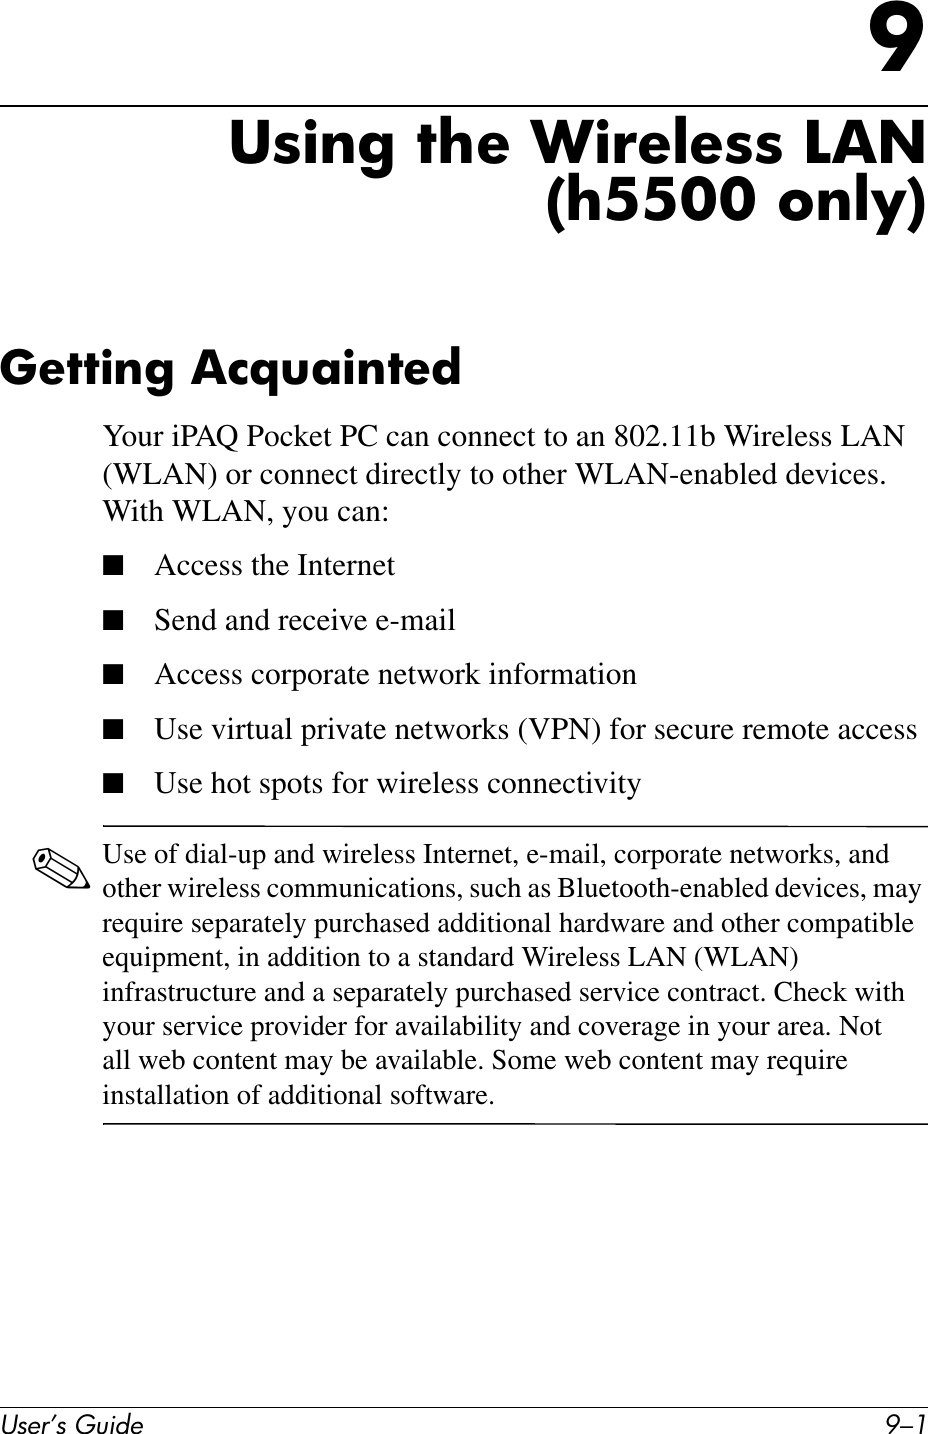 User’s Guide 9–19Using the Wireless LAN(h5500 only)Getting AcquaintedYour iPAQ Pocket PC can connect to an 802.11b Wireless LAN (WLAN) or connect directly to other WLAN-enabled devices. With WLAN, you can:■Access the Internet■Send and receive e-mail■Access corporate network information■Use virtual private networks (VPN) for secure remote access■Use hot spots for wireless connectivity✎Use of dial-up and wireless Internet, e-mail, corporate networks, and other wireless communications, such as Bluetooth-enabled devices, may require separately purchased additional hardware and other compatible equipment, in addition to a standard Wireless LAN (WLAN) infrastructure and a separately purchased service contract. Check with your service provider for availability and coverage in your area. Not all web content may be available. Some web content may require installation of additional software.